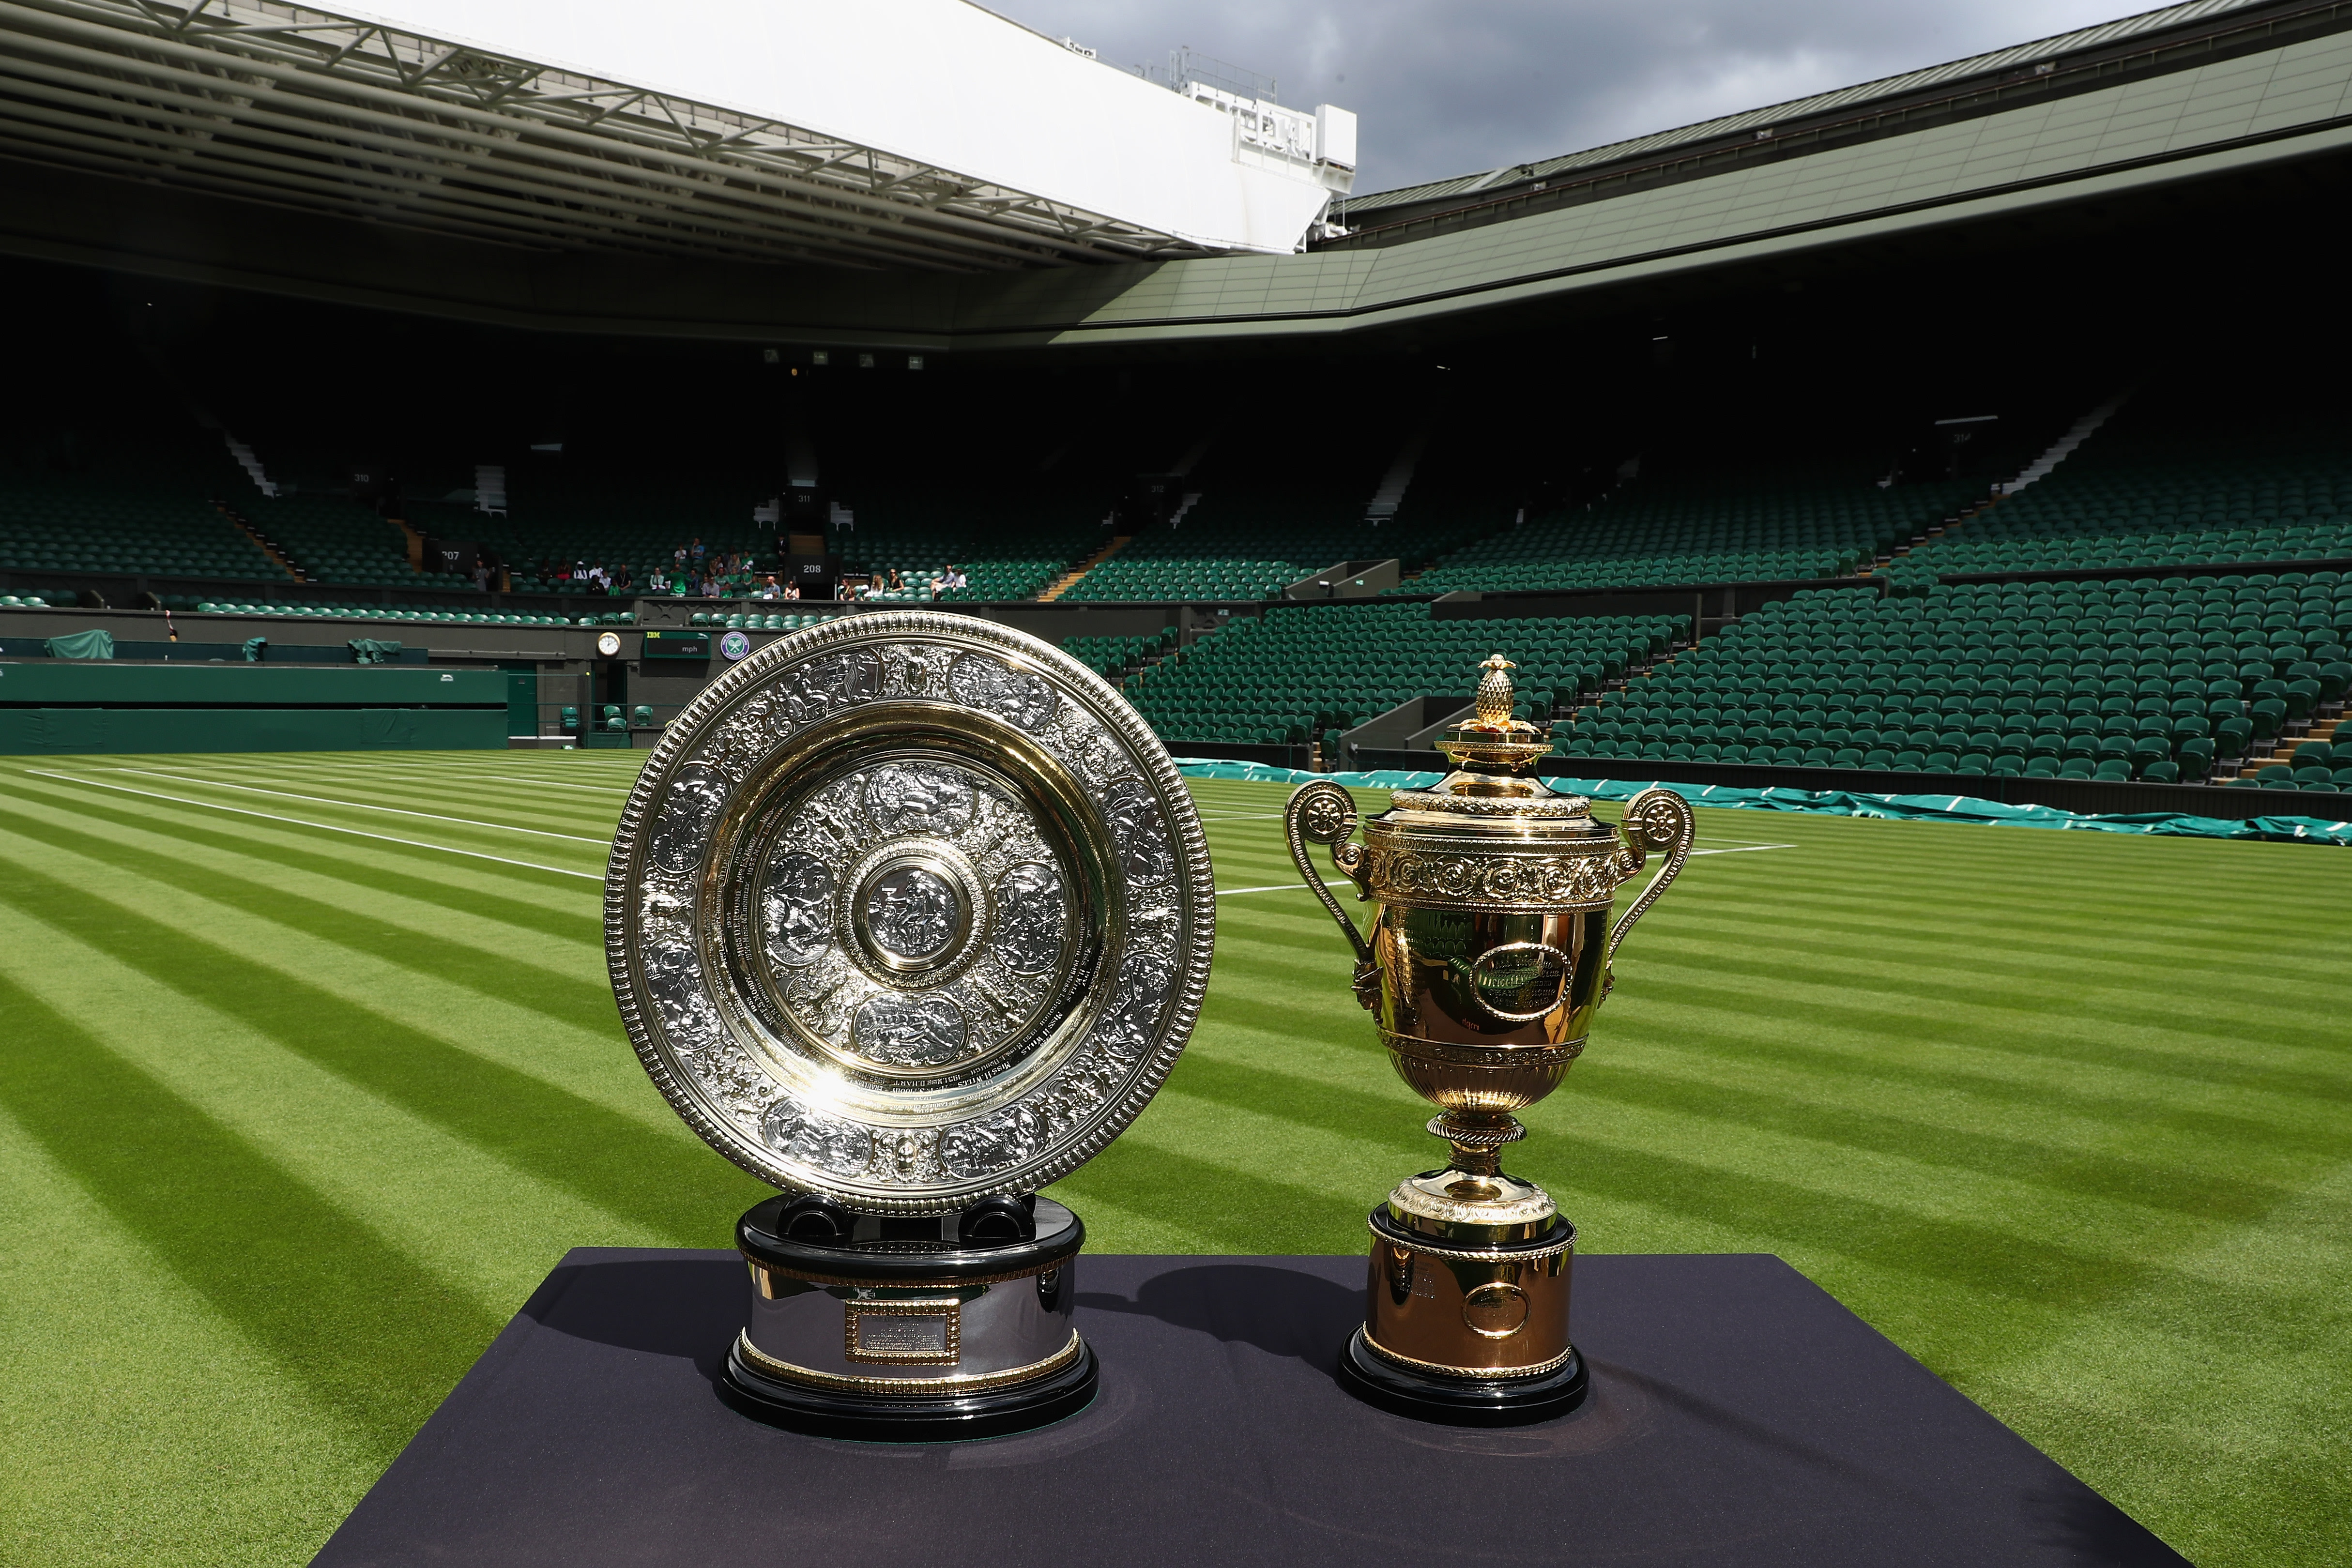 Pushed, Wimbledon falls on its sword, will allow Russian and Belarusian to compete in its 2023 Championships